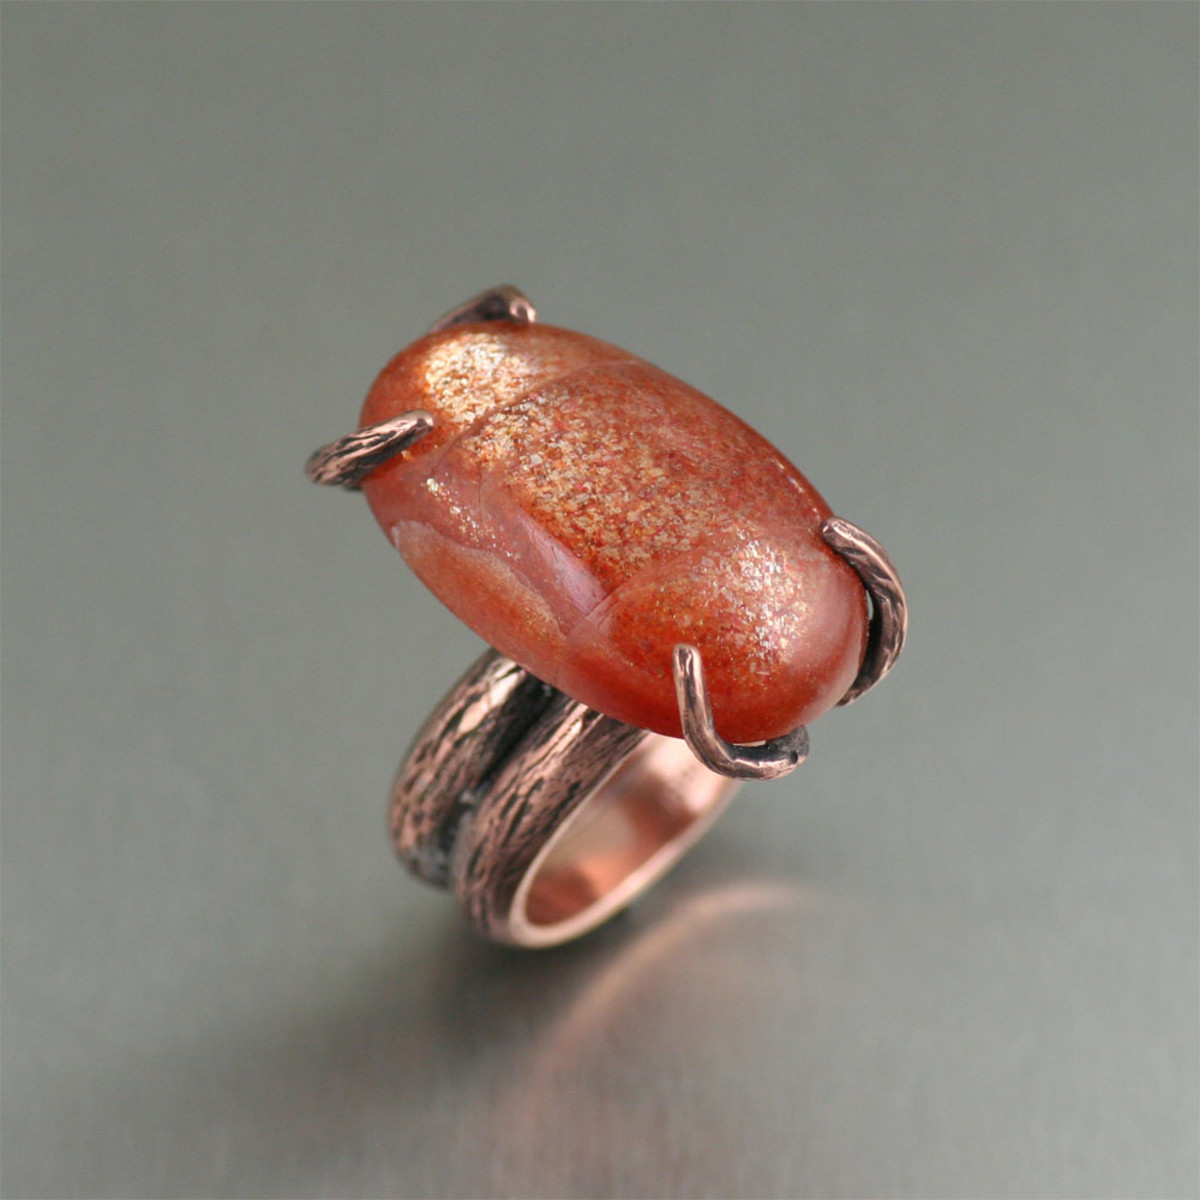 Uncover uncommon luxury in this Copper Bark Sunstone Handmade Ring. The nature-inspired, handcrafted branch texture is highlighted with a rich orange colored 29 carat Sunstone cabochon.